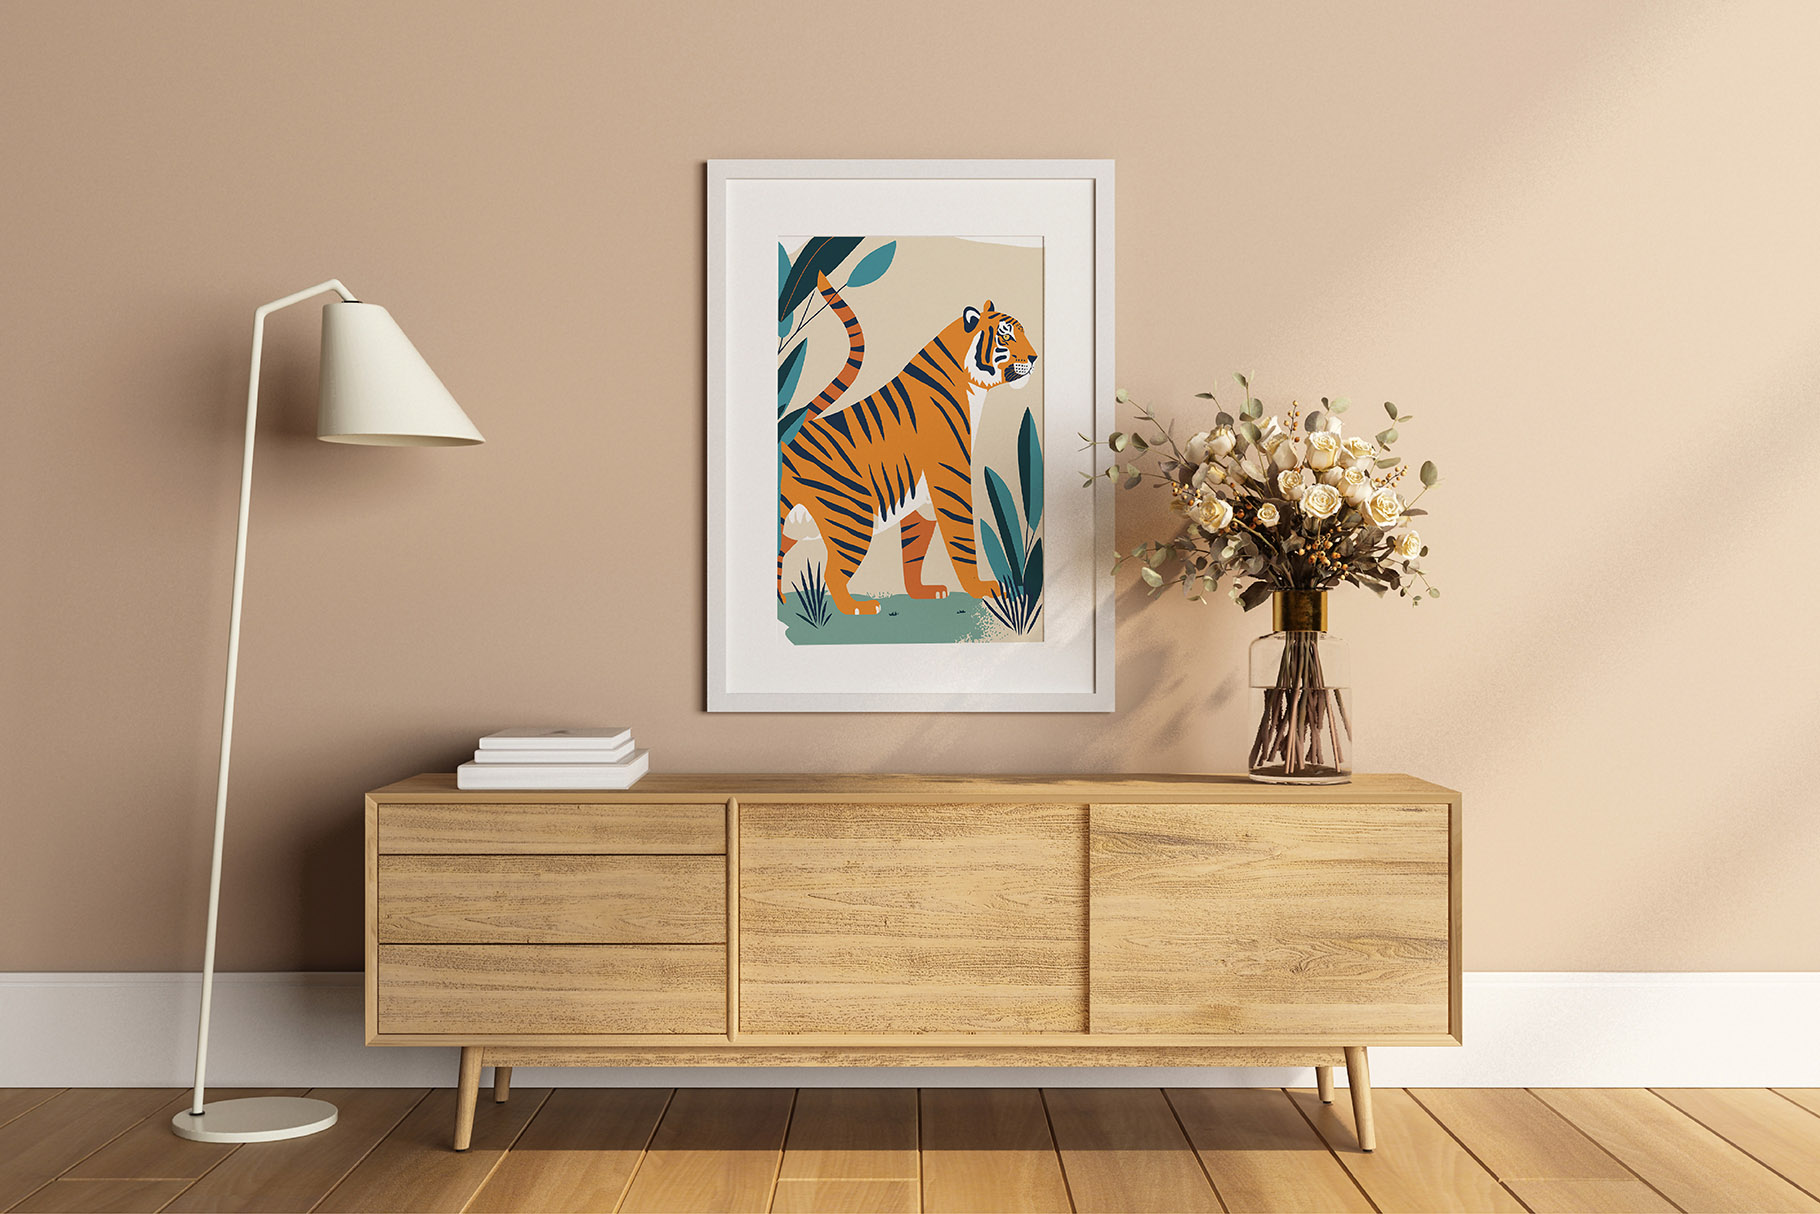 Picture of a tiger on a wall above a dresser.